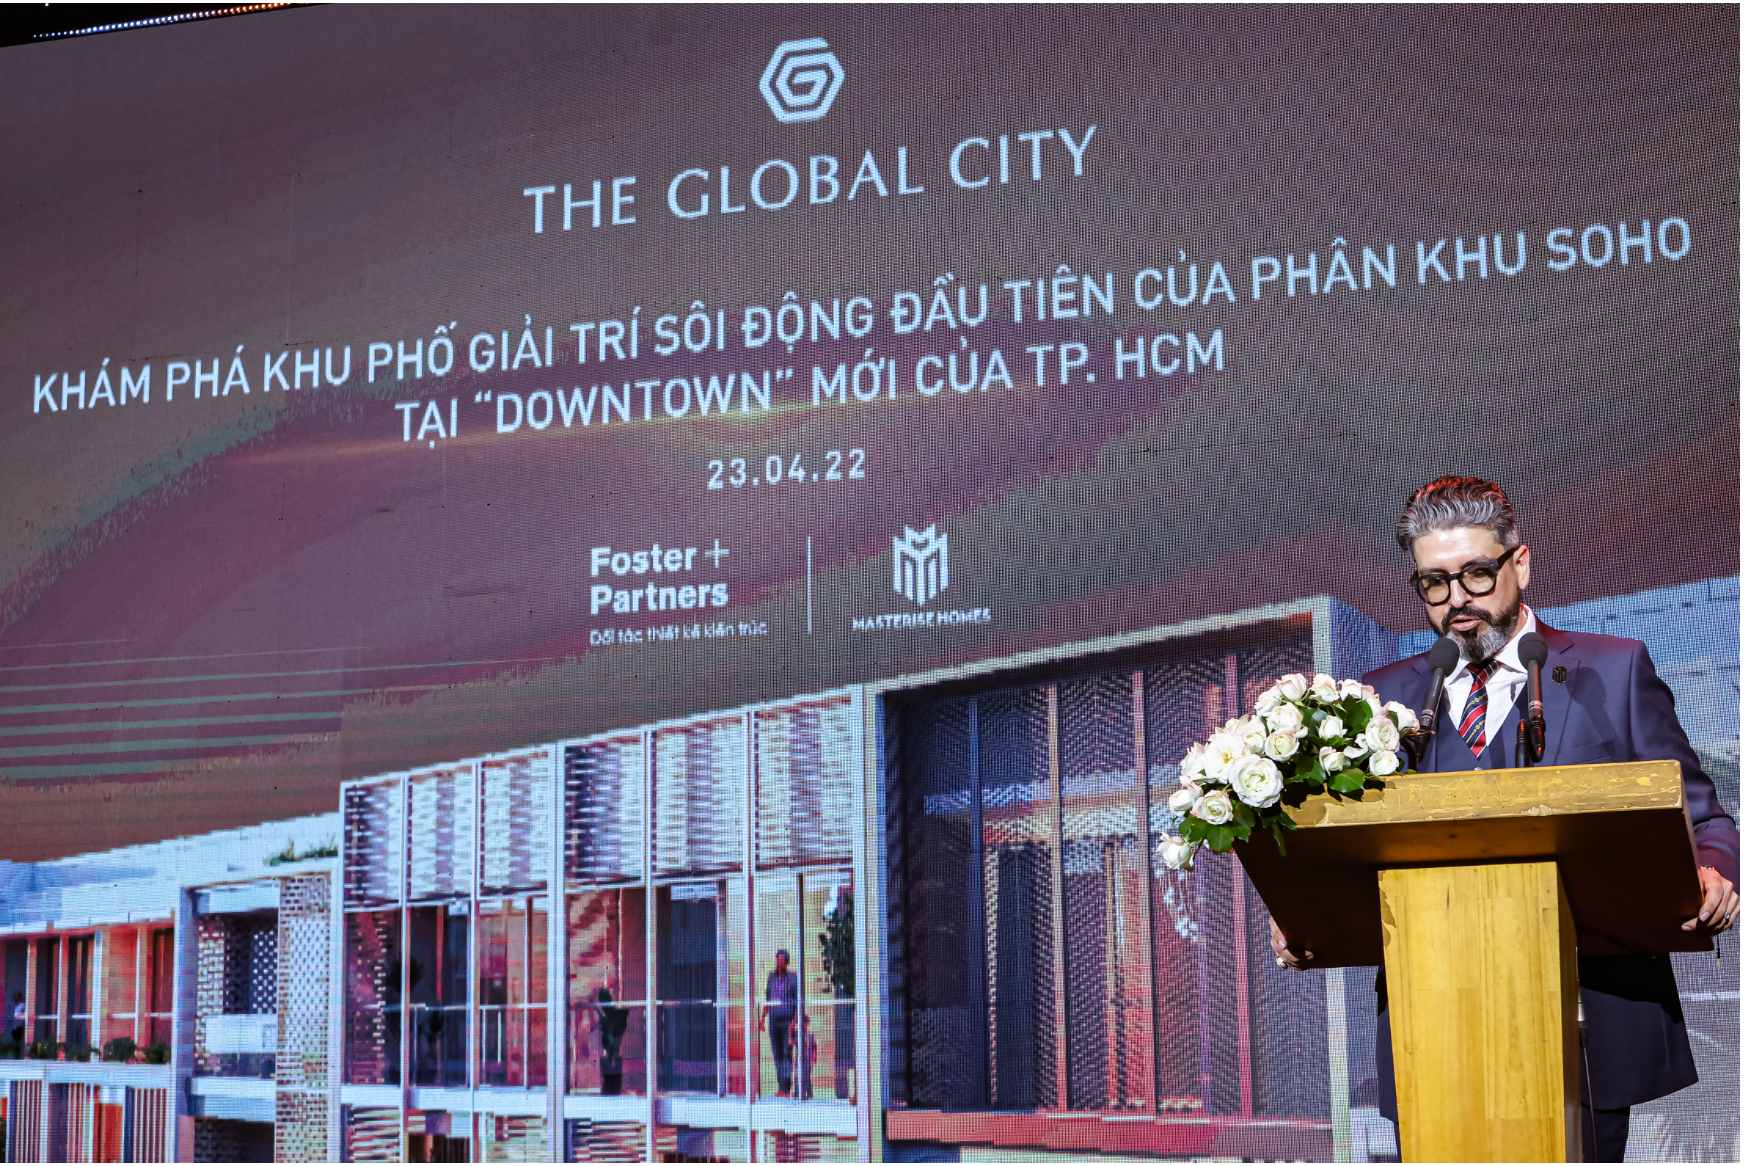 The Global City attracts investors with the "downtown" experience.